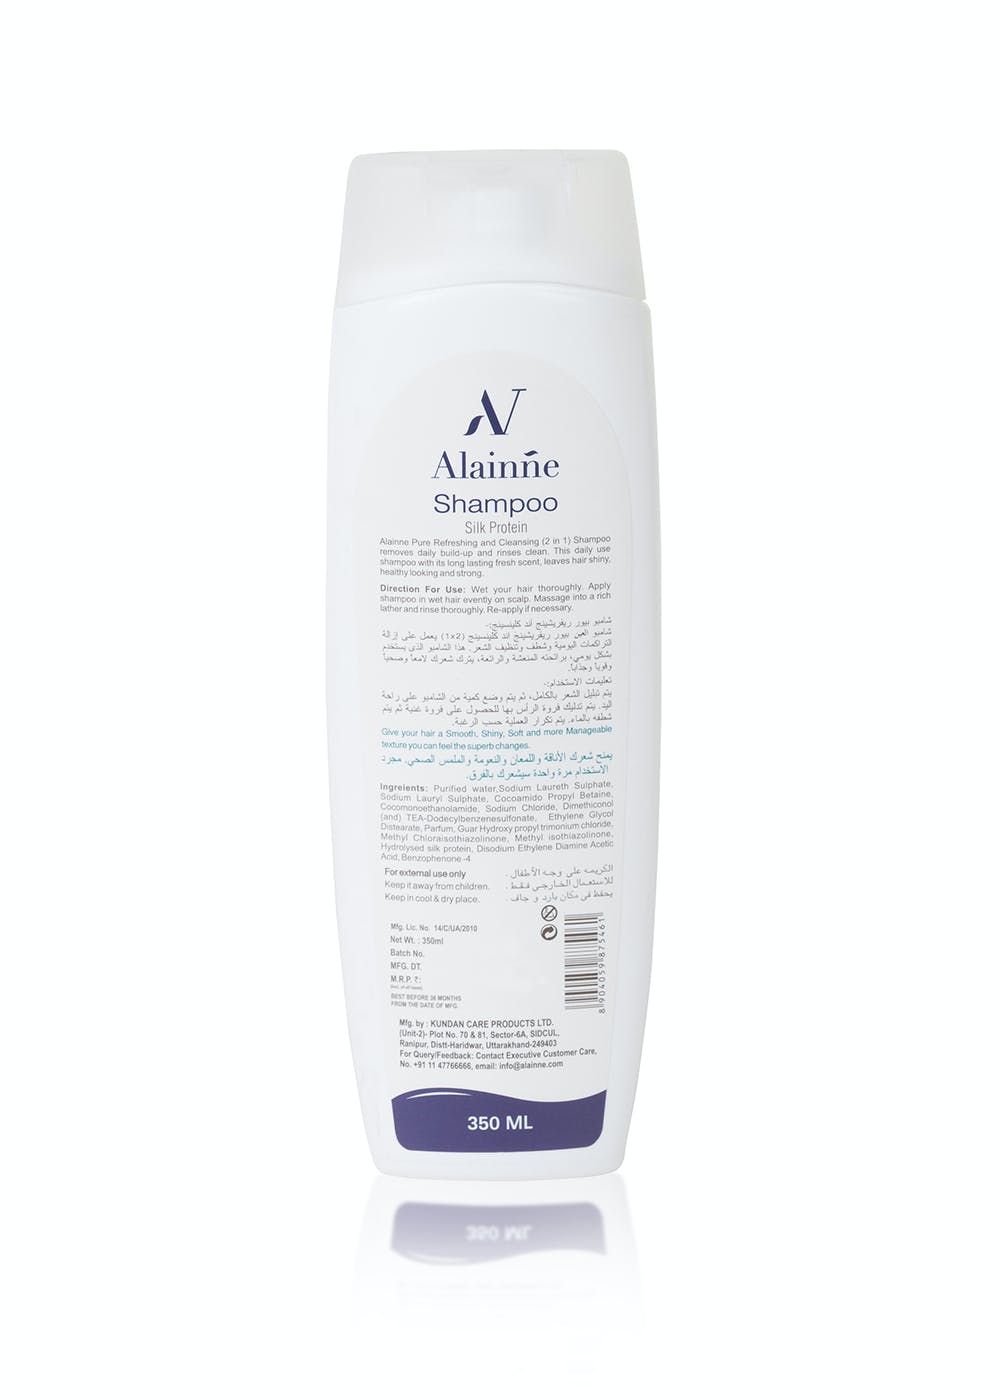 Get Free Flowing Pure Refreshing & Cleansing Shampoo - 350ml at ₹ 270 | LBB  Shop